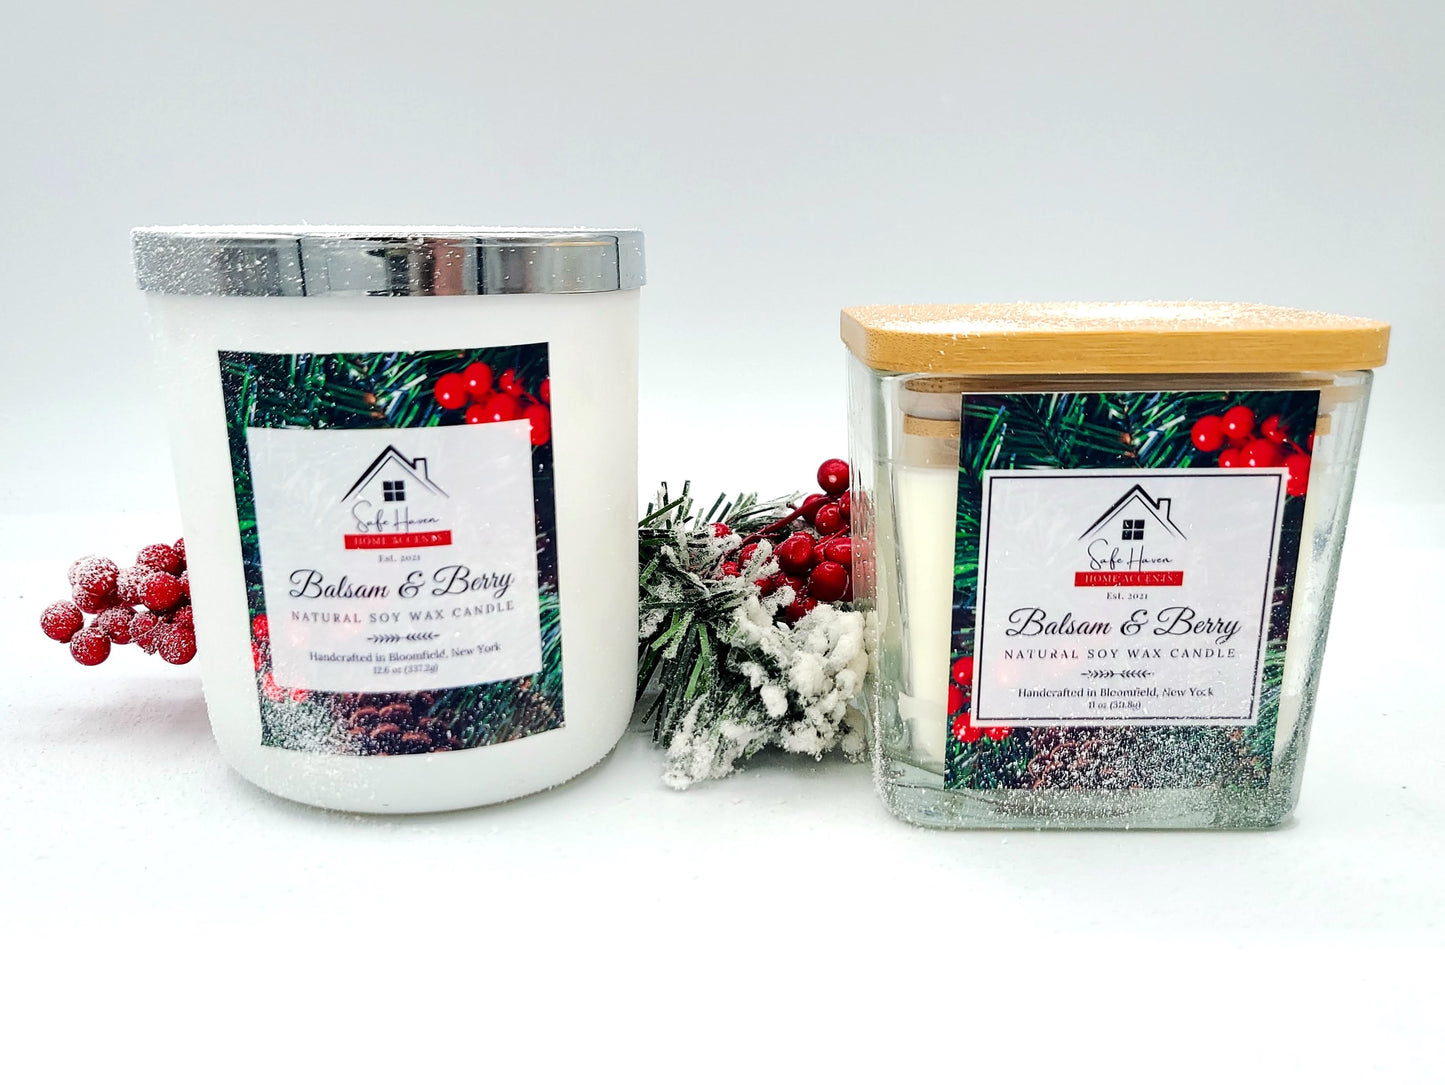 Balsam & Berry Natural Soy Wax Candle